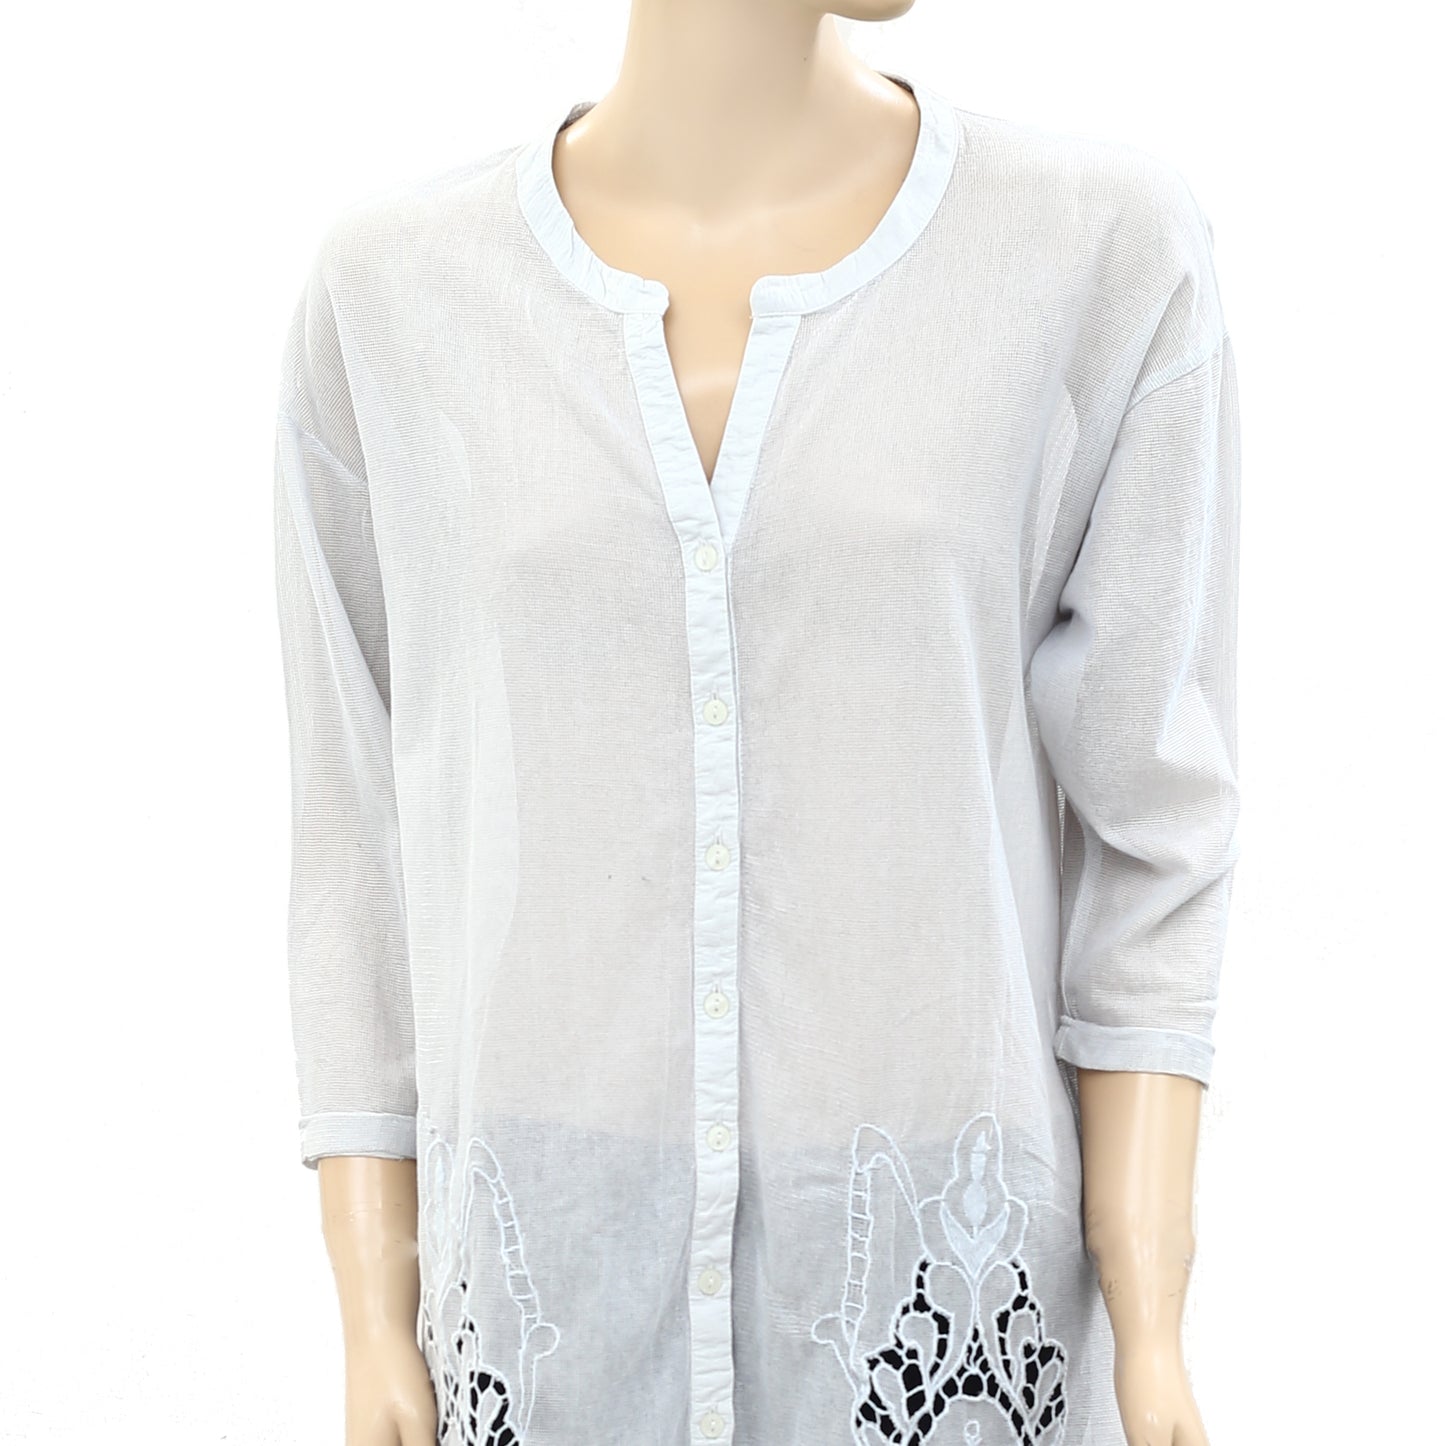 Meadow Rue Anthropologie Mesh Embroidered Ciel Tunic Top S